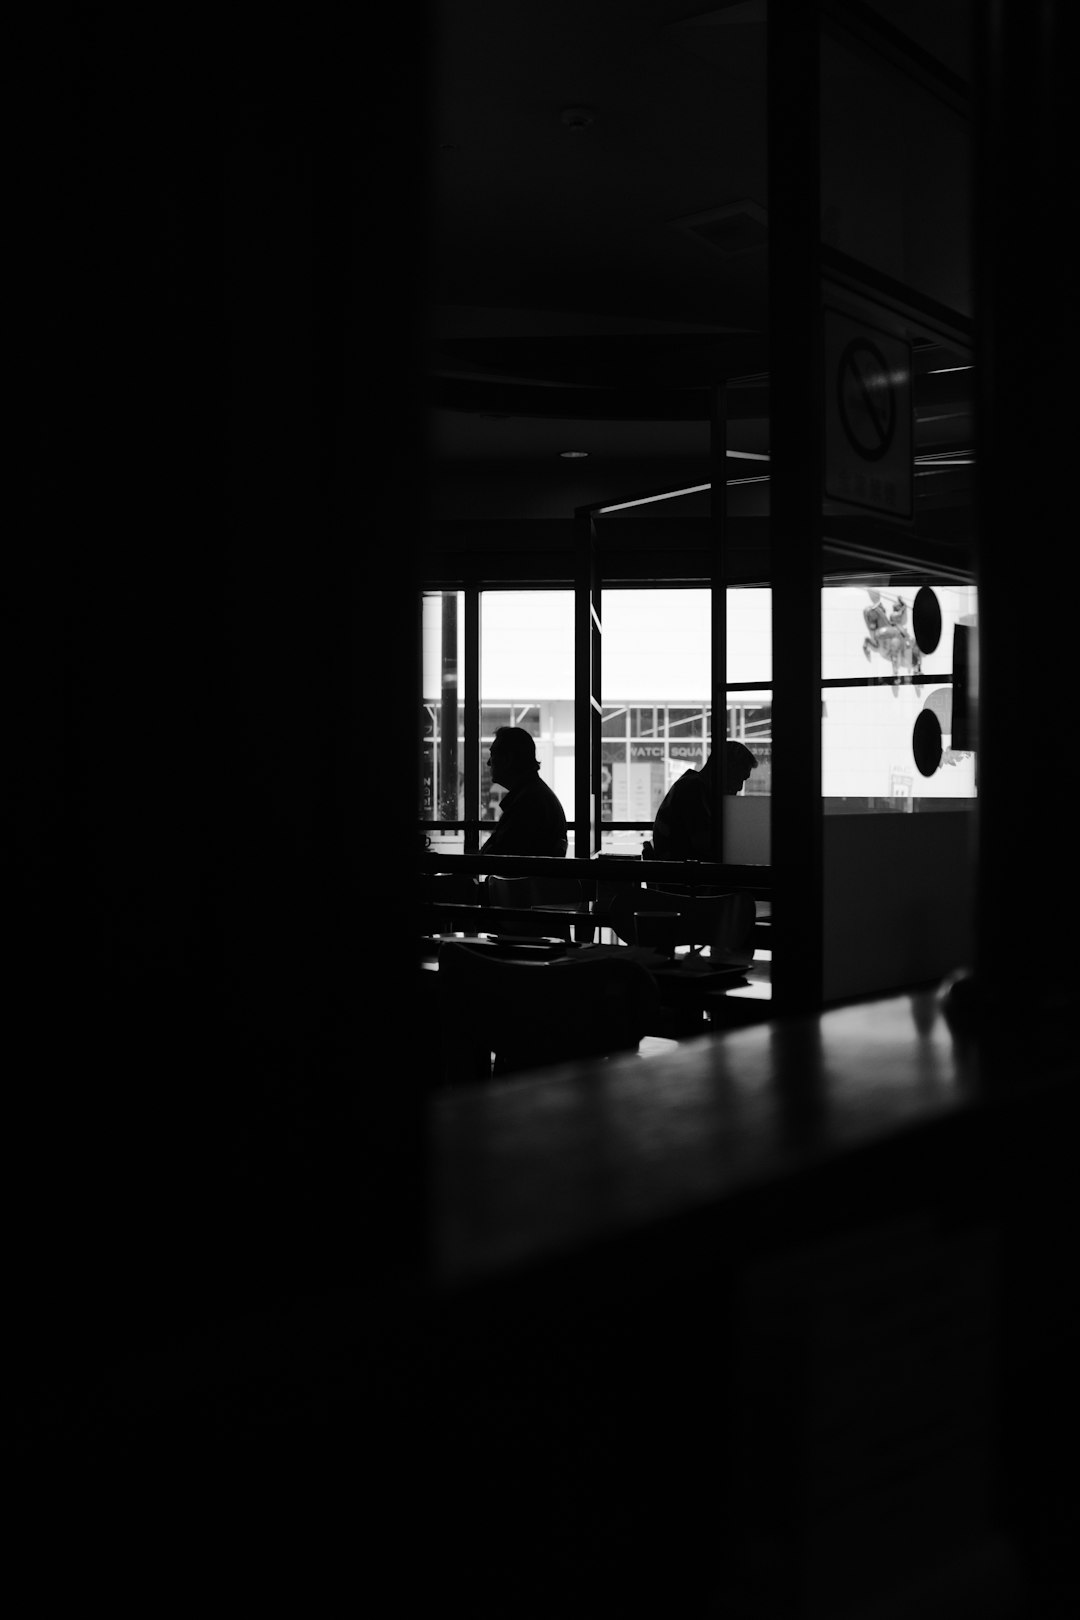 silhouette of people sitting on chair inside building